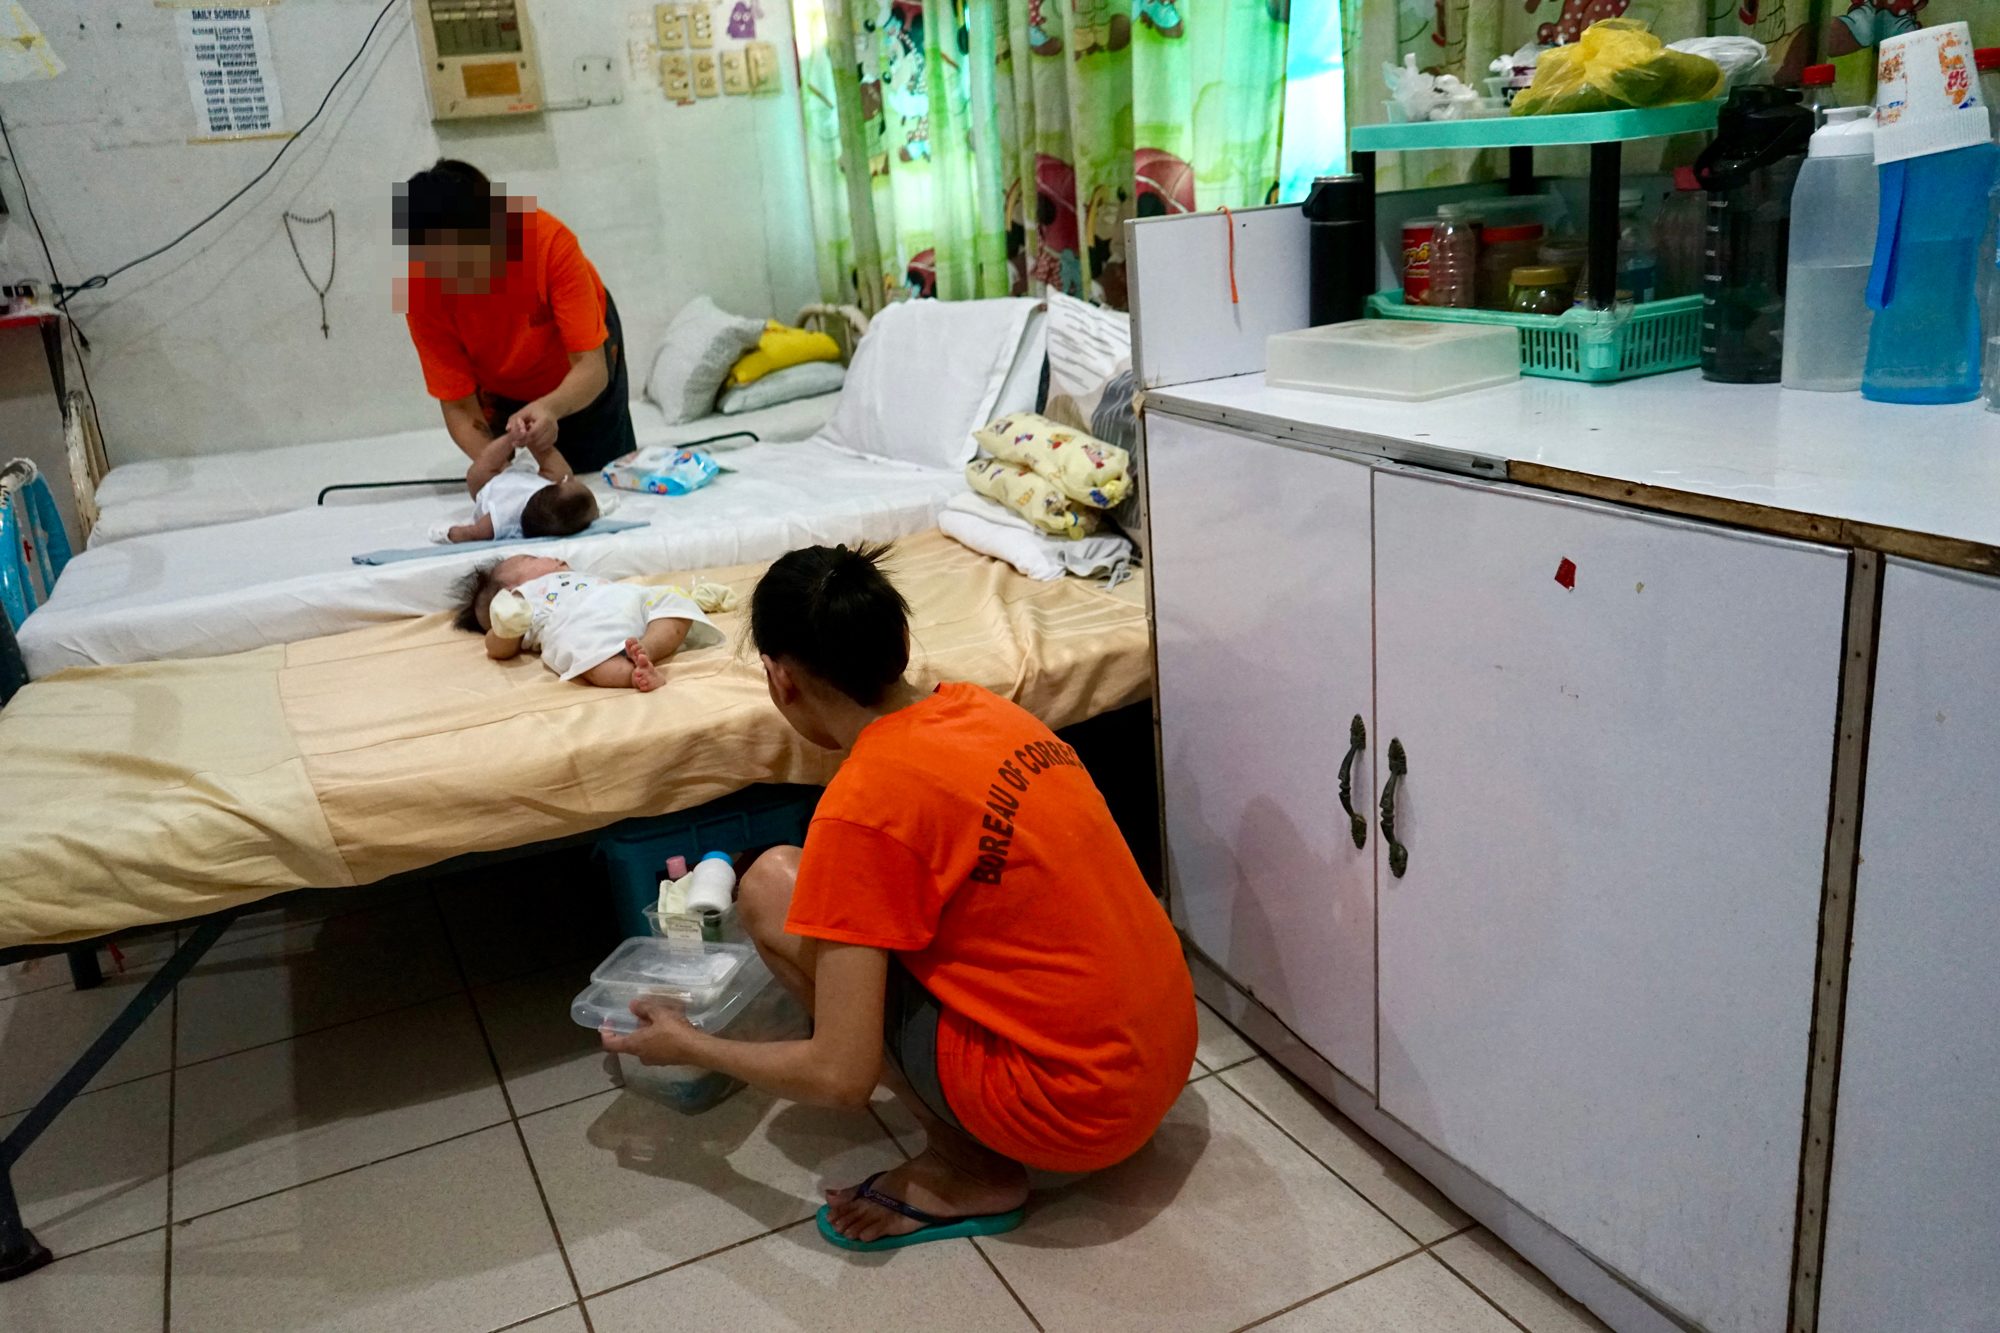 In prison, mother and baby share P85 a day for food, medicine